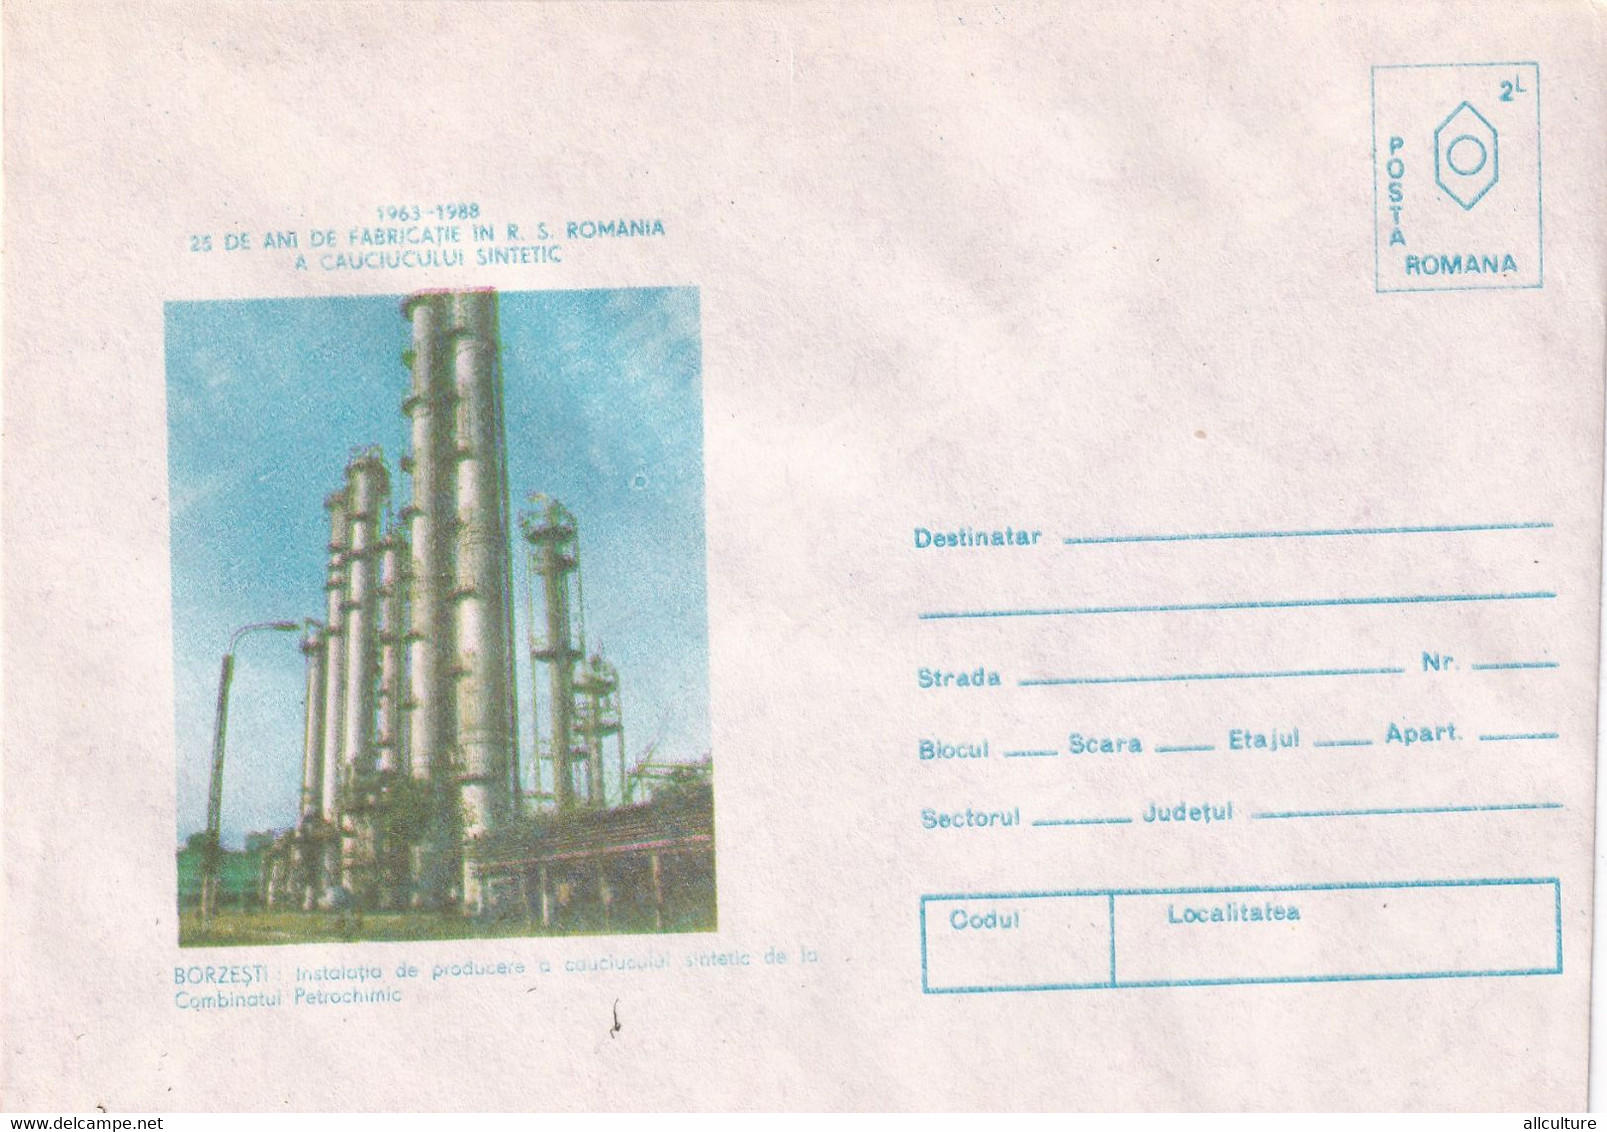 A3118 - 25 Years Of Manufacturing Synthetic Rubber, Petrochemical Plant, Borzesti  Romania Cover Stationery - Fabbriche E Imprese